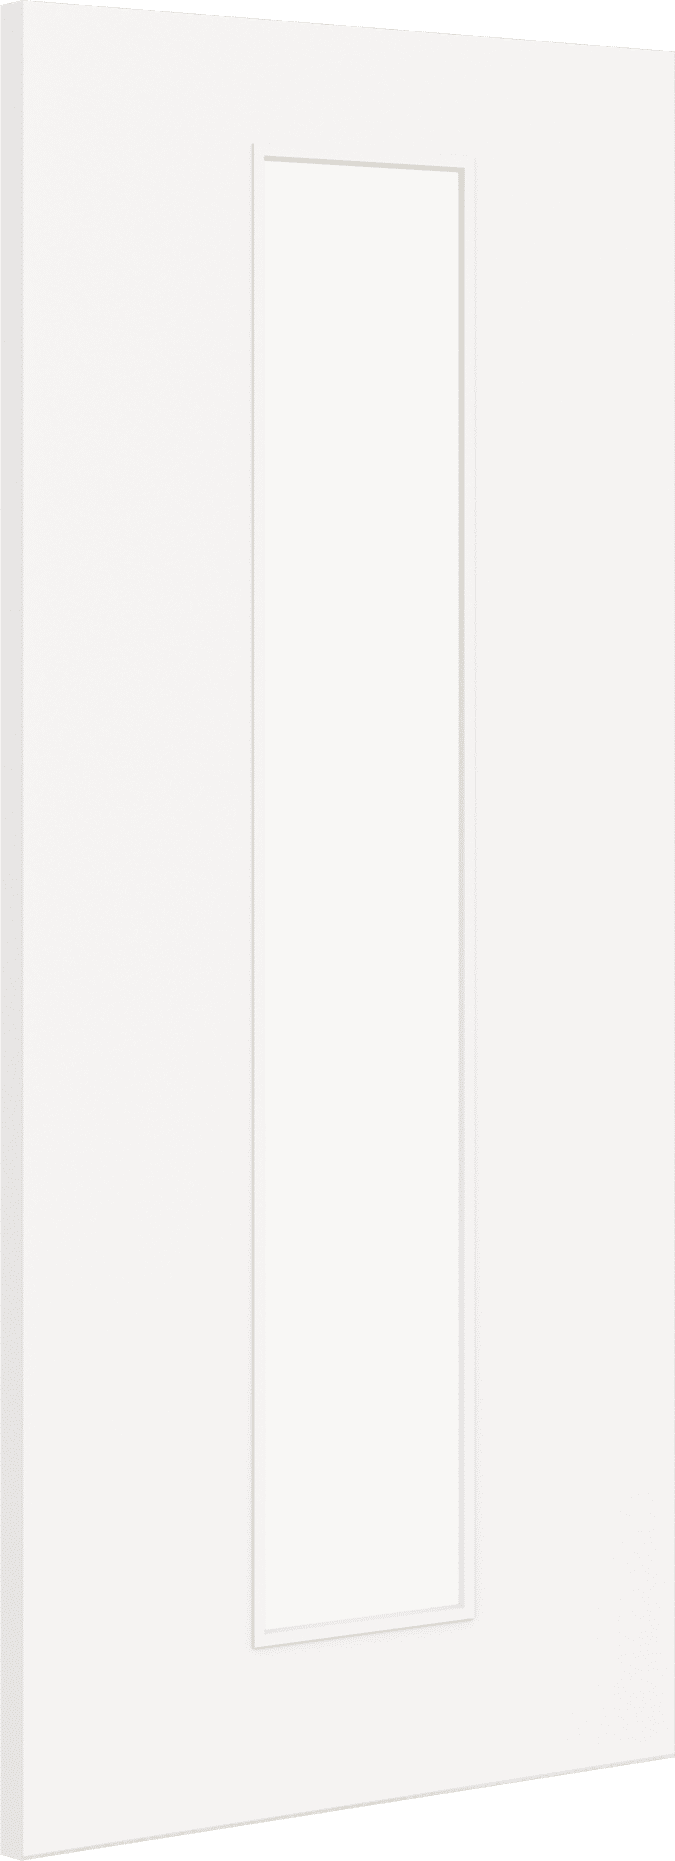 1981mm x 686mm x 44mm (27") Architectural Paint Grade White 10 Frosted Glazed Fire Door Blank